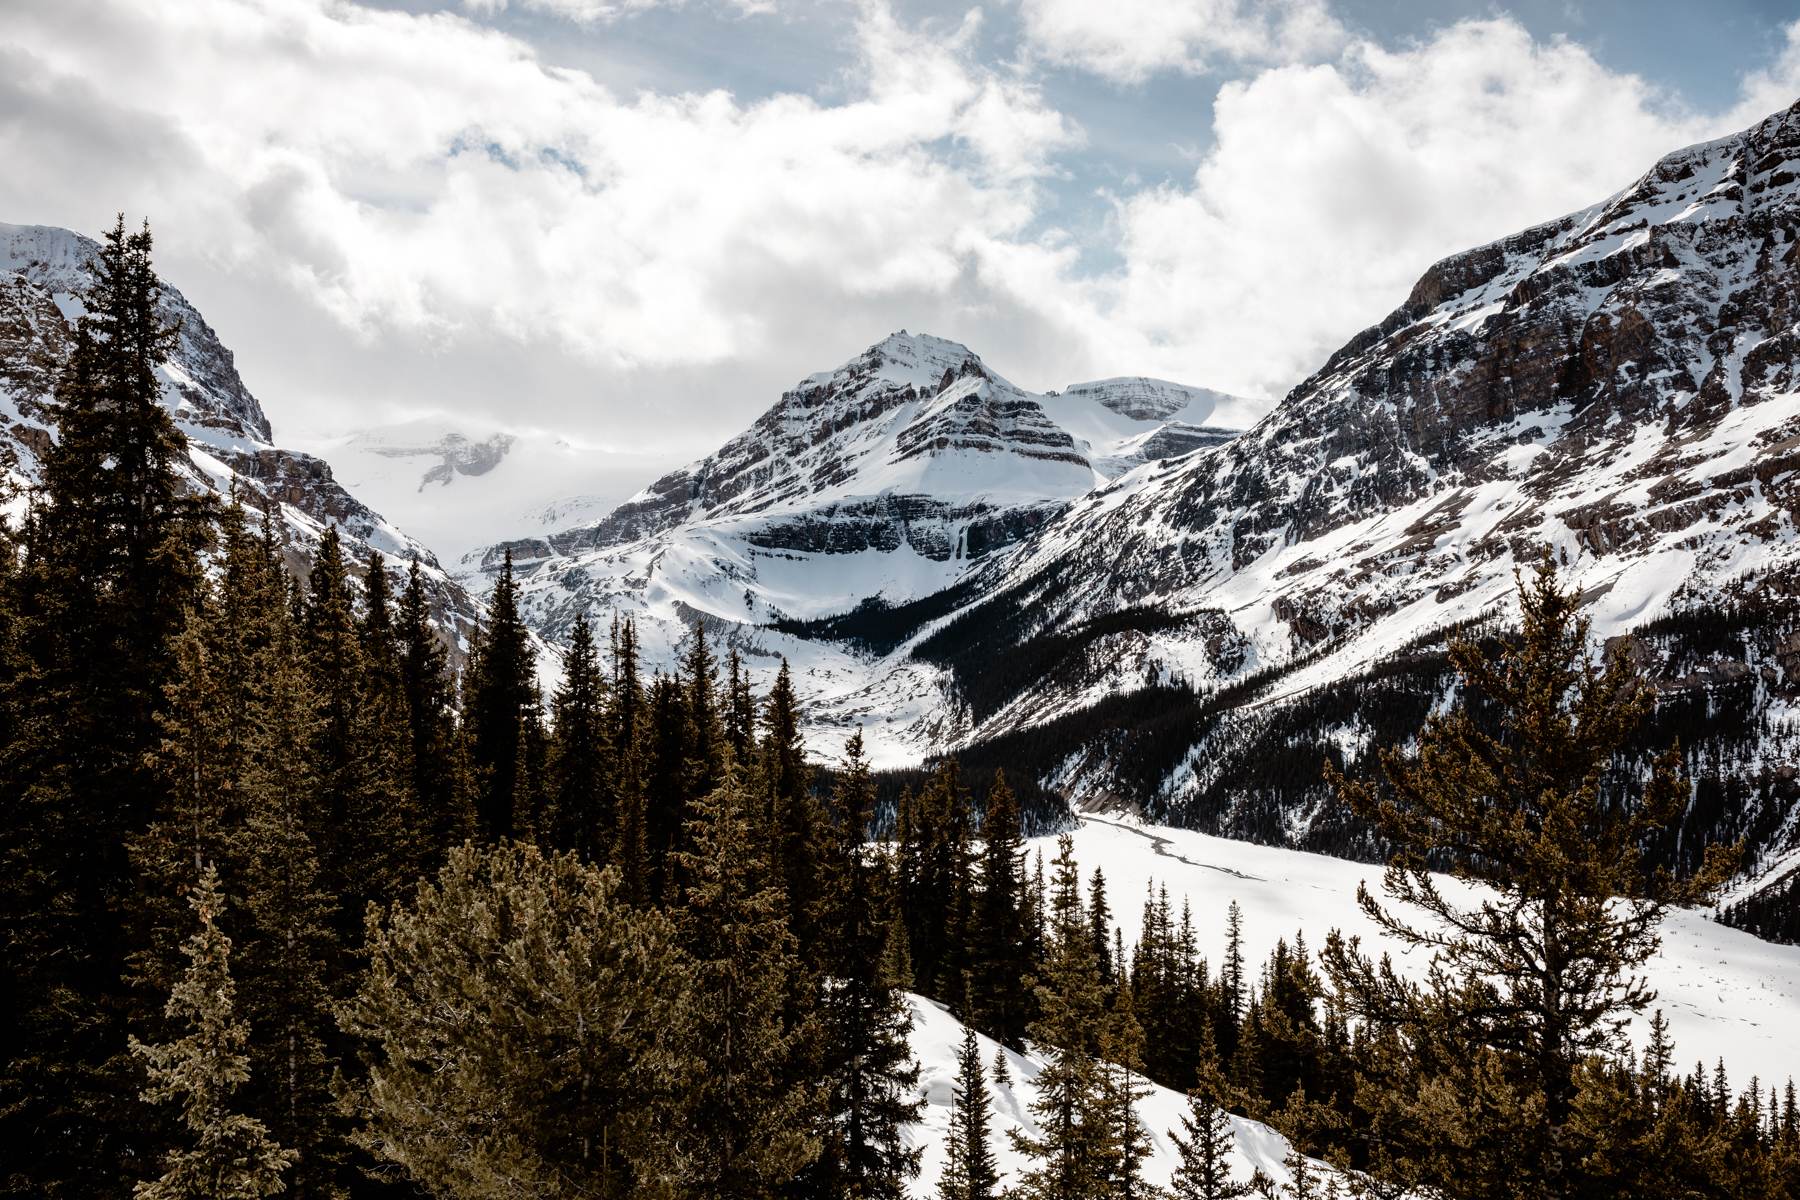 Banff National Park Elopement Photography with LGBTQ-friendly photographers - Image 5